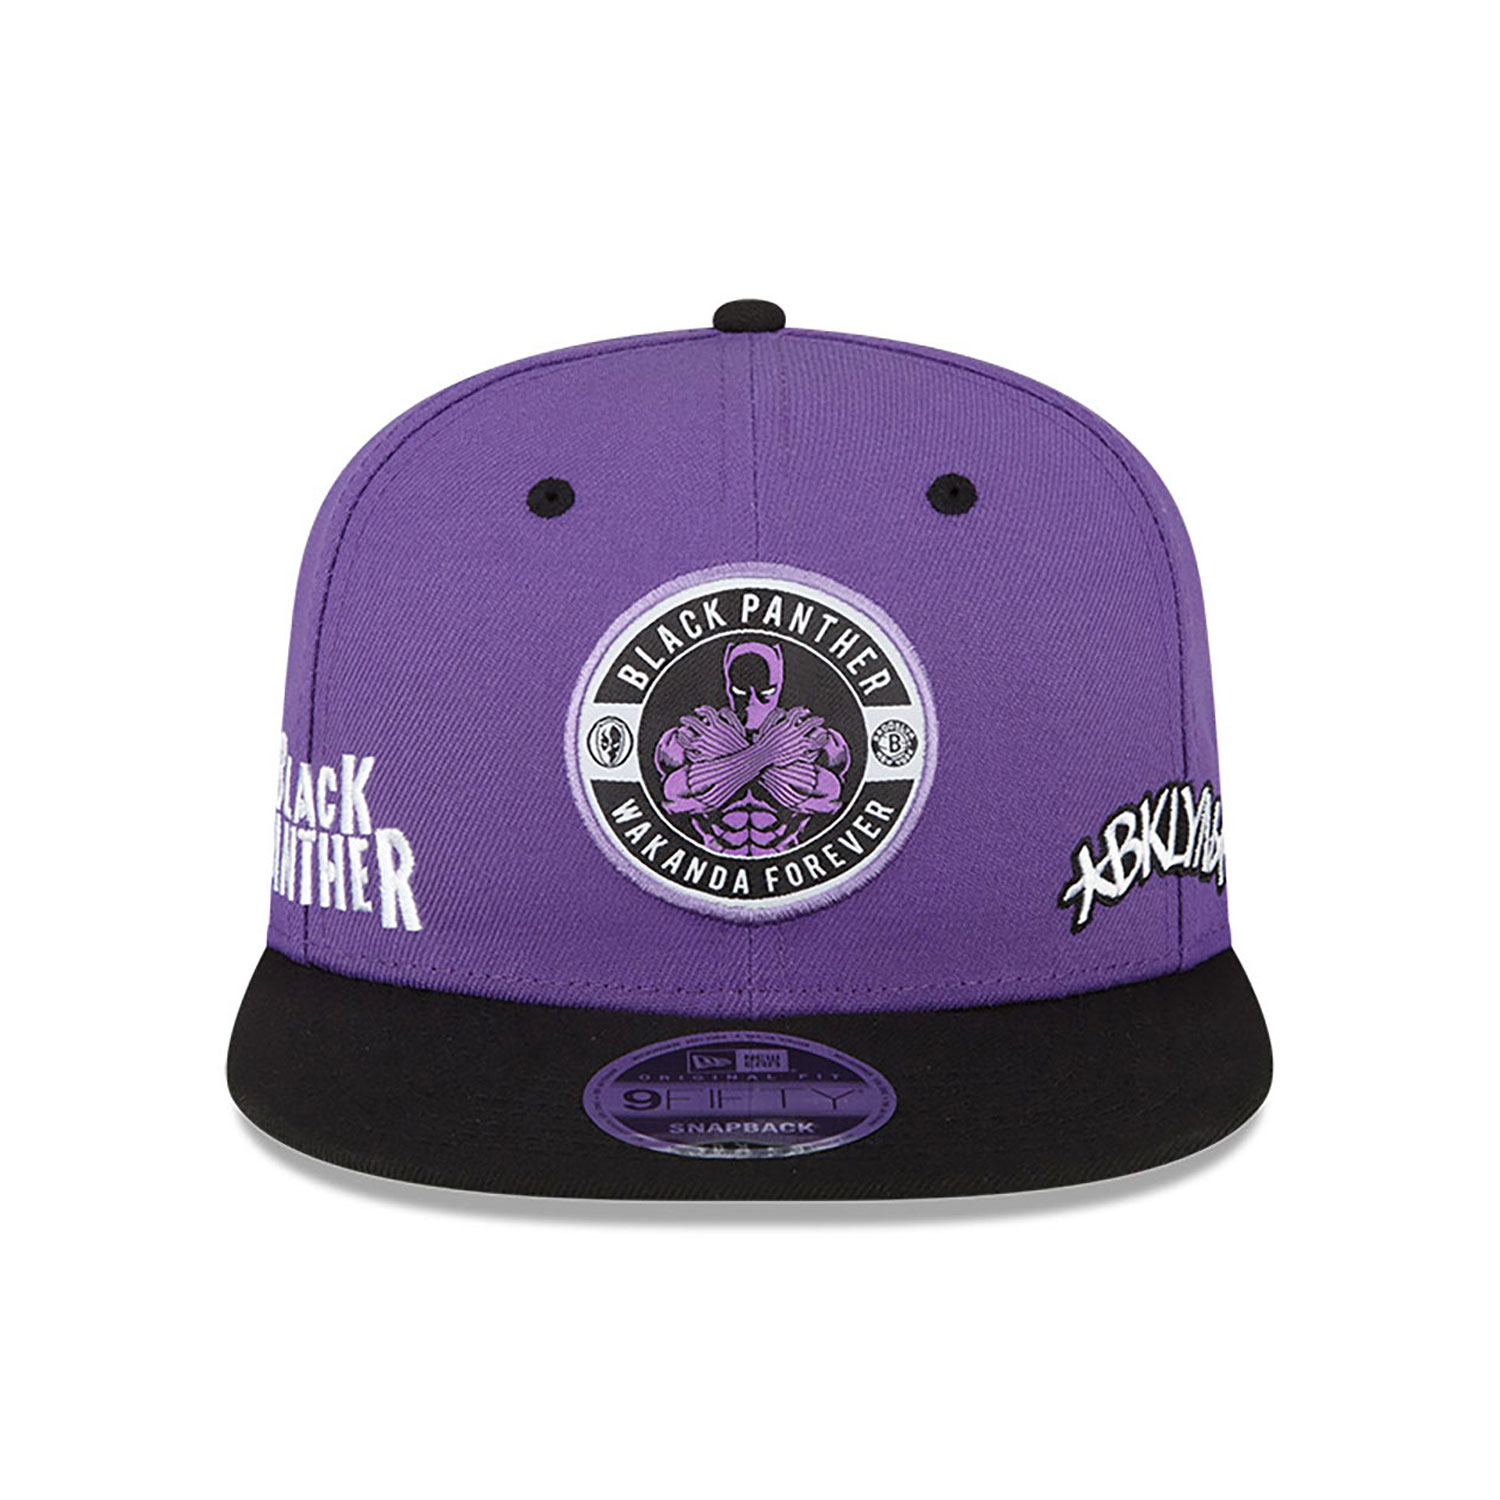 Casquette 9FIFTY Snapback Brooklyn Nets NBA Marvel Black Panther violette